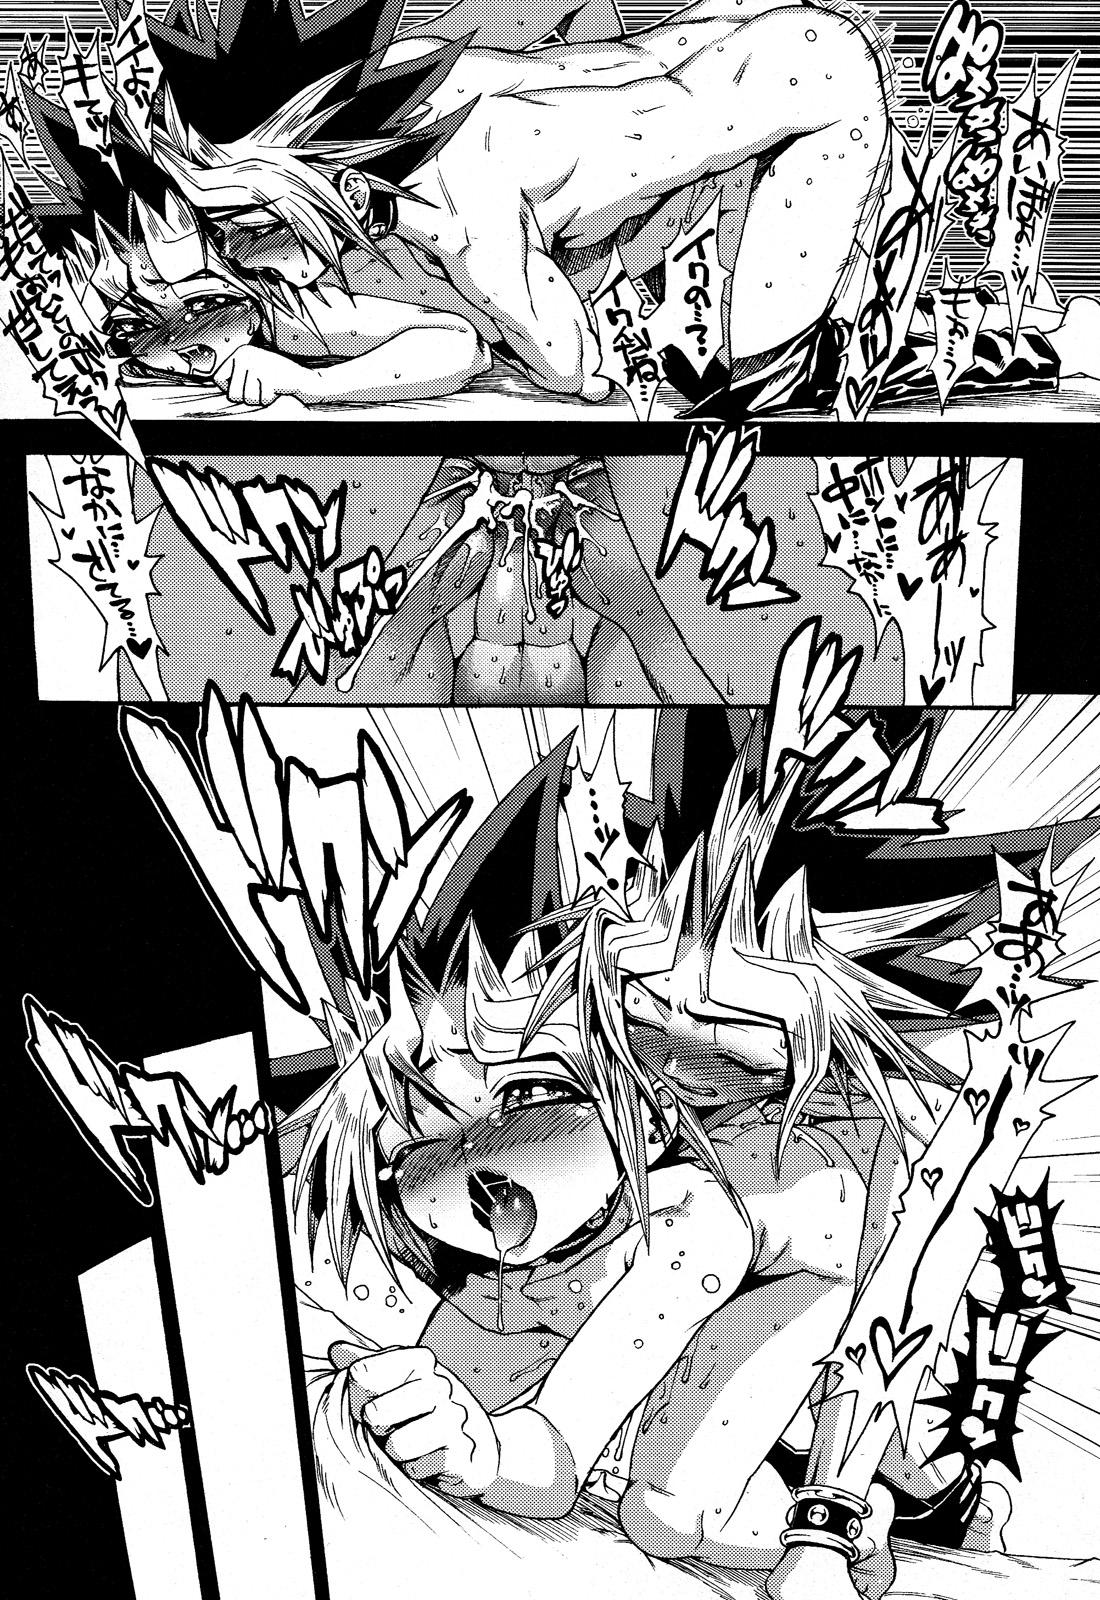 Blowing Tasogare no Oukoku - Yu-gi-oh Submissive - Page 10